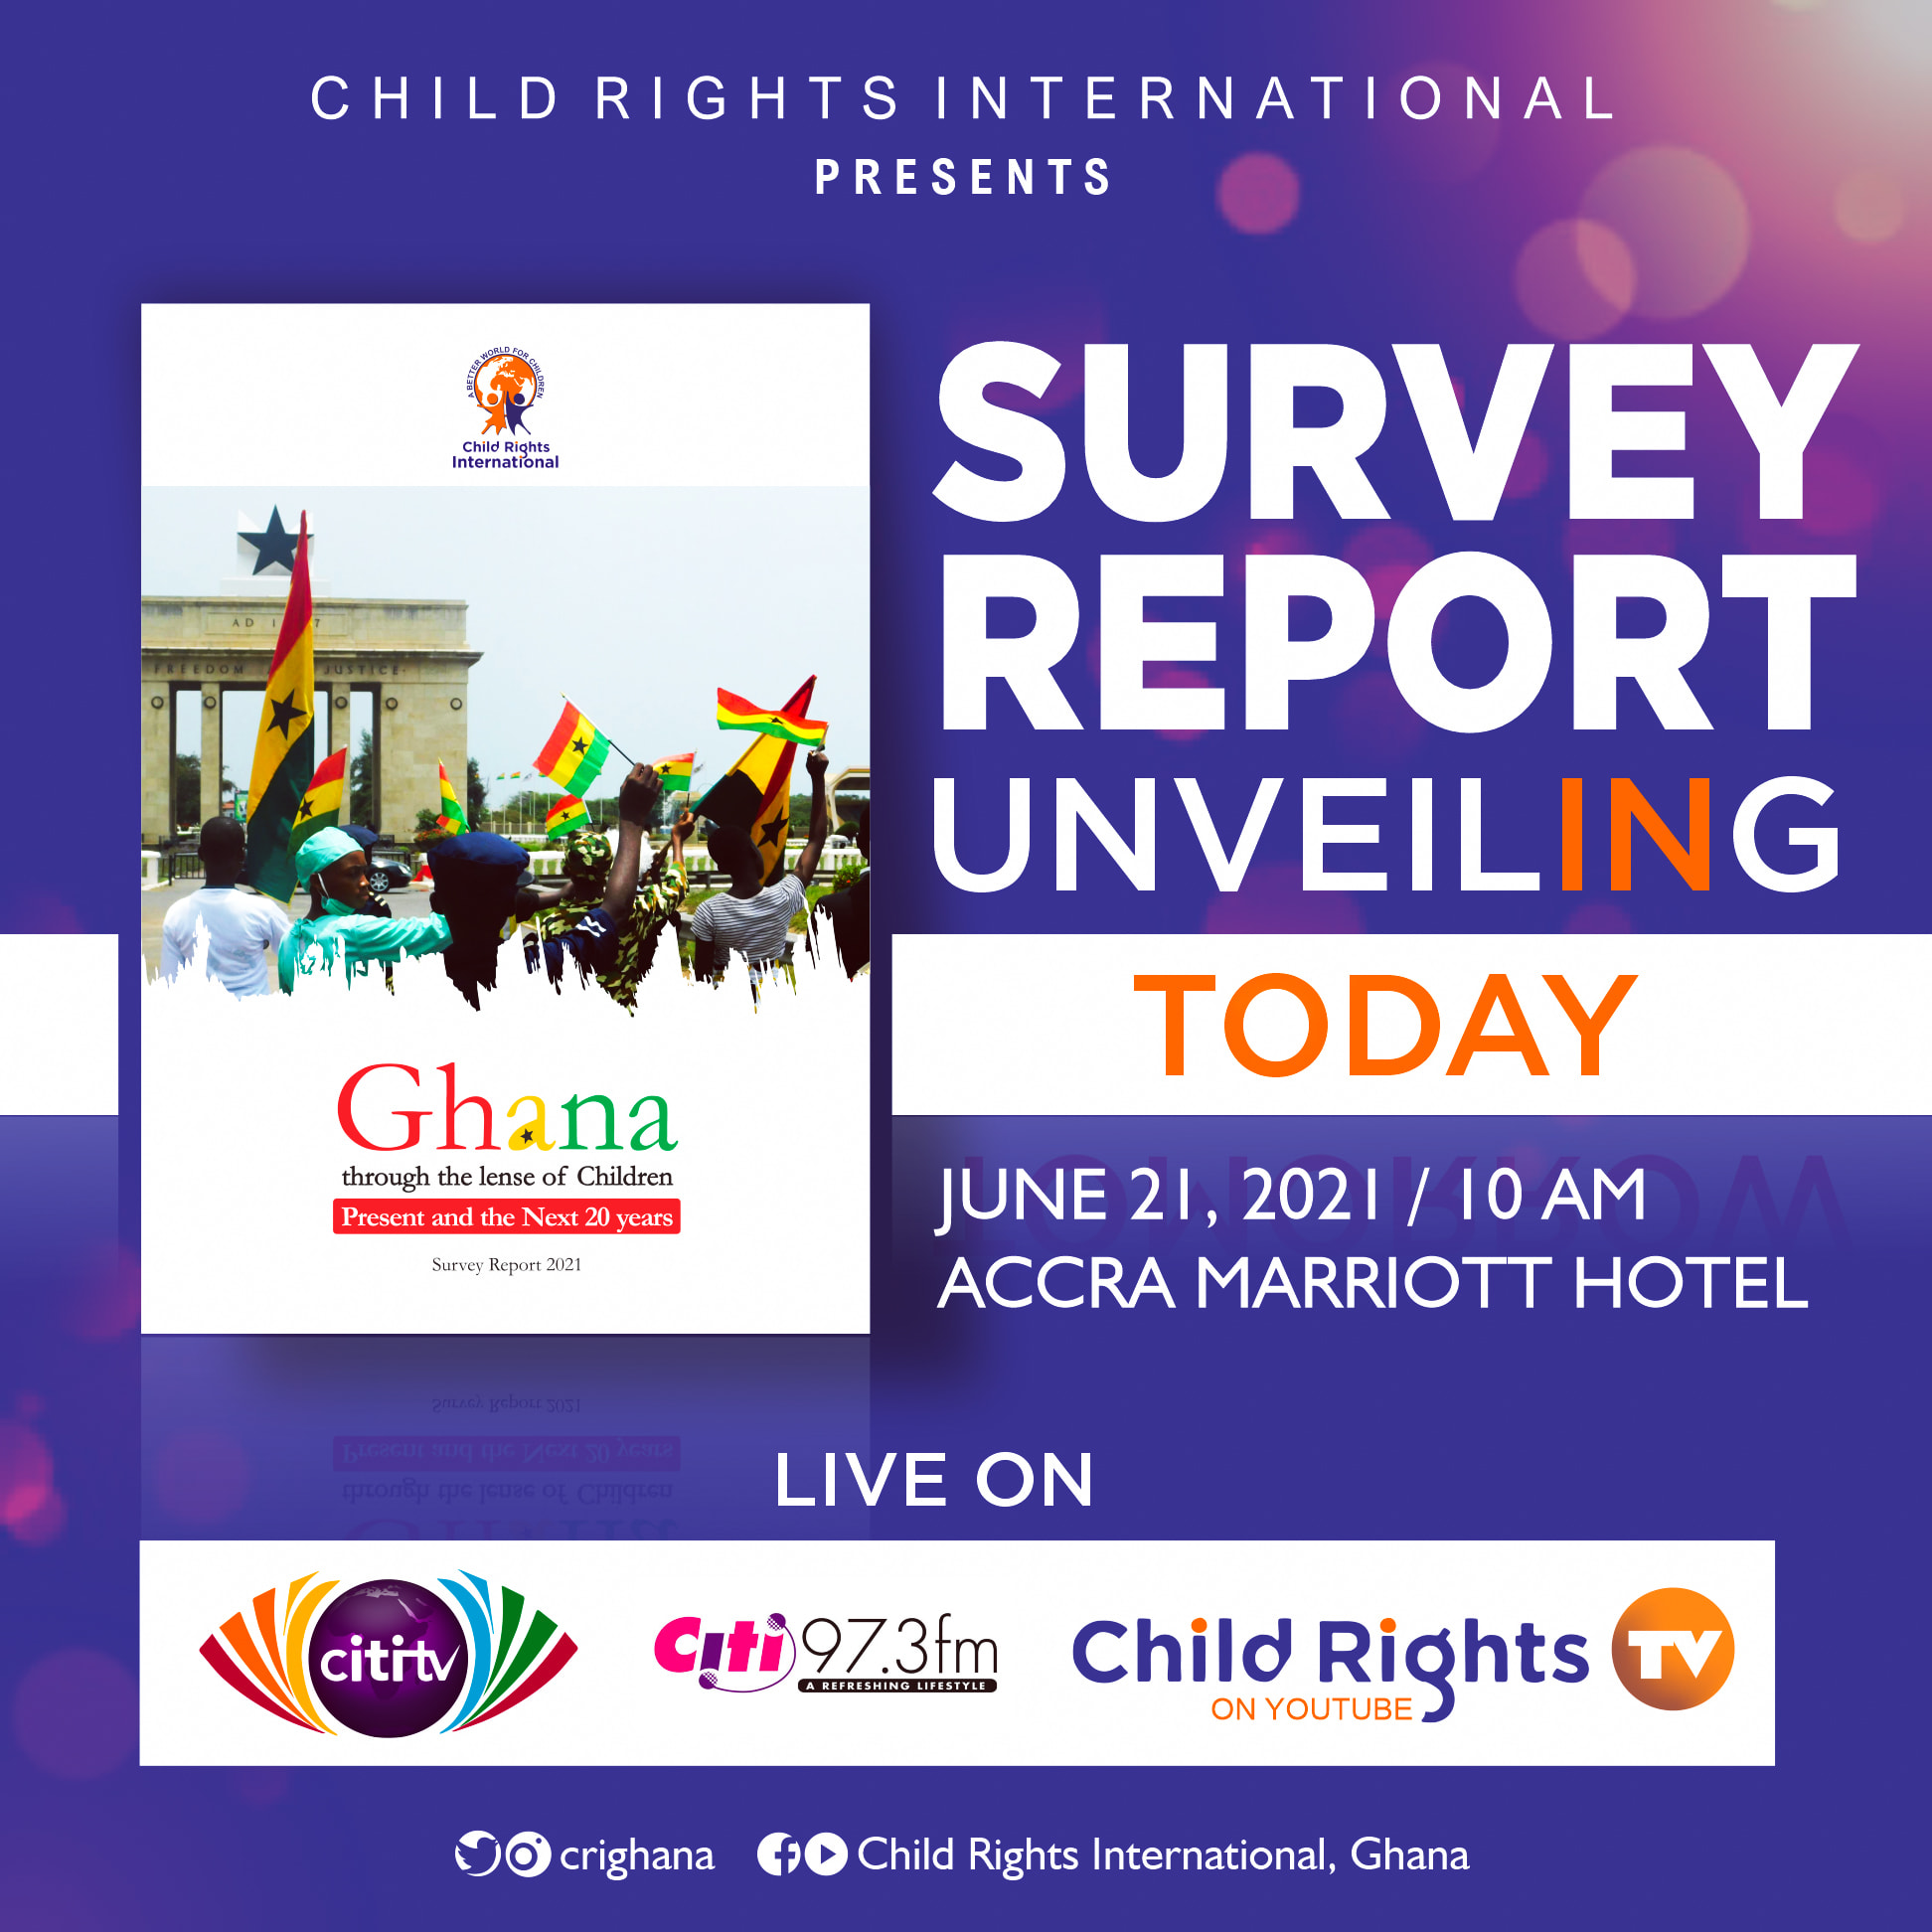 GHANA THROUGH THE LENS OF CHILDREN PRESENT AND THE NEXT 20 YEARS